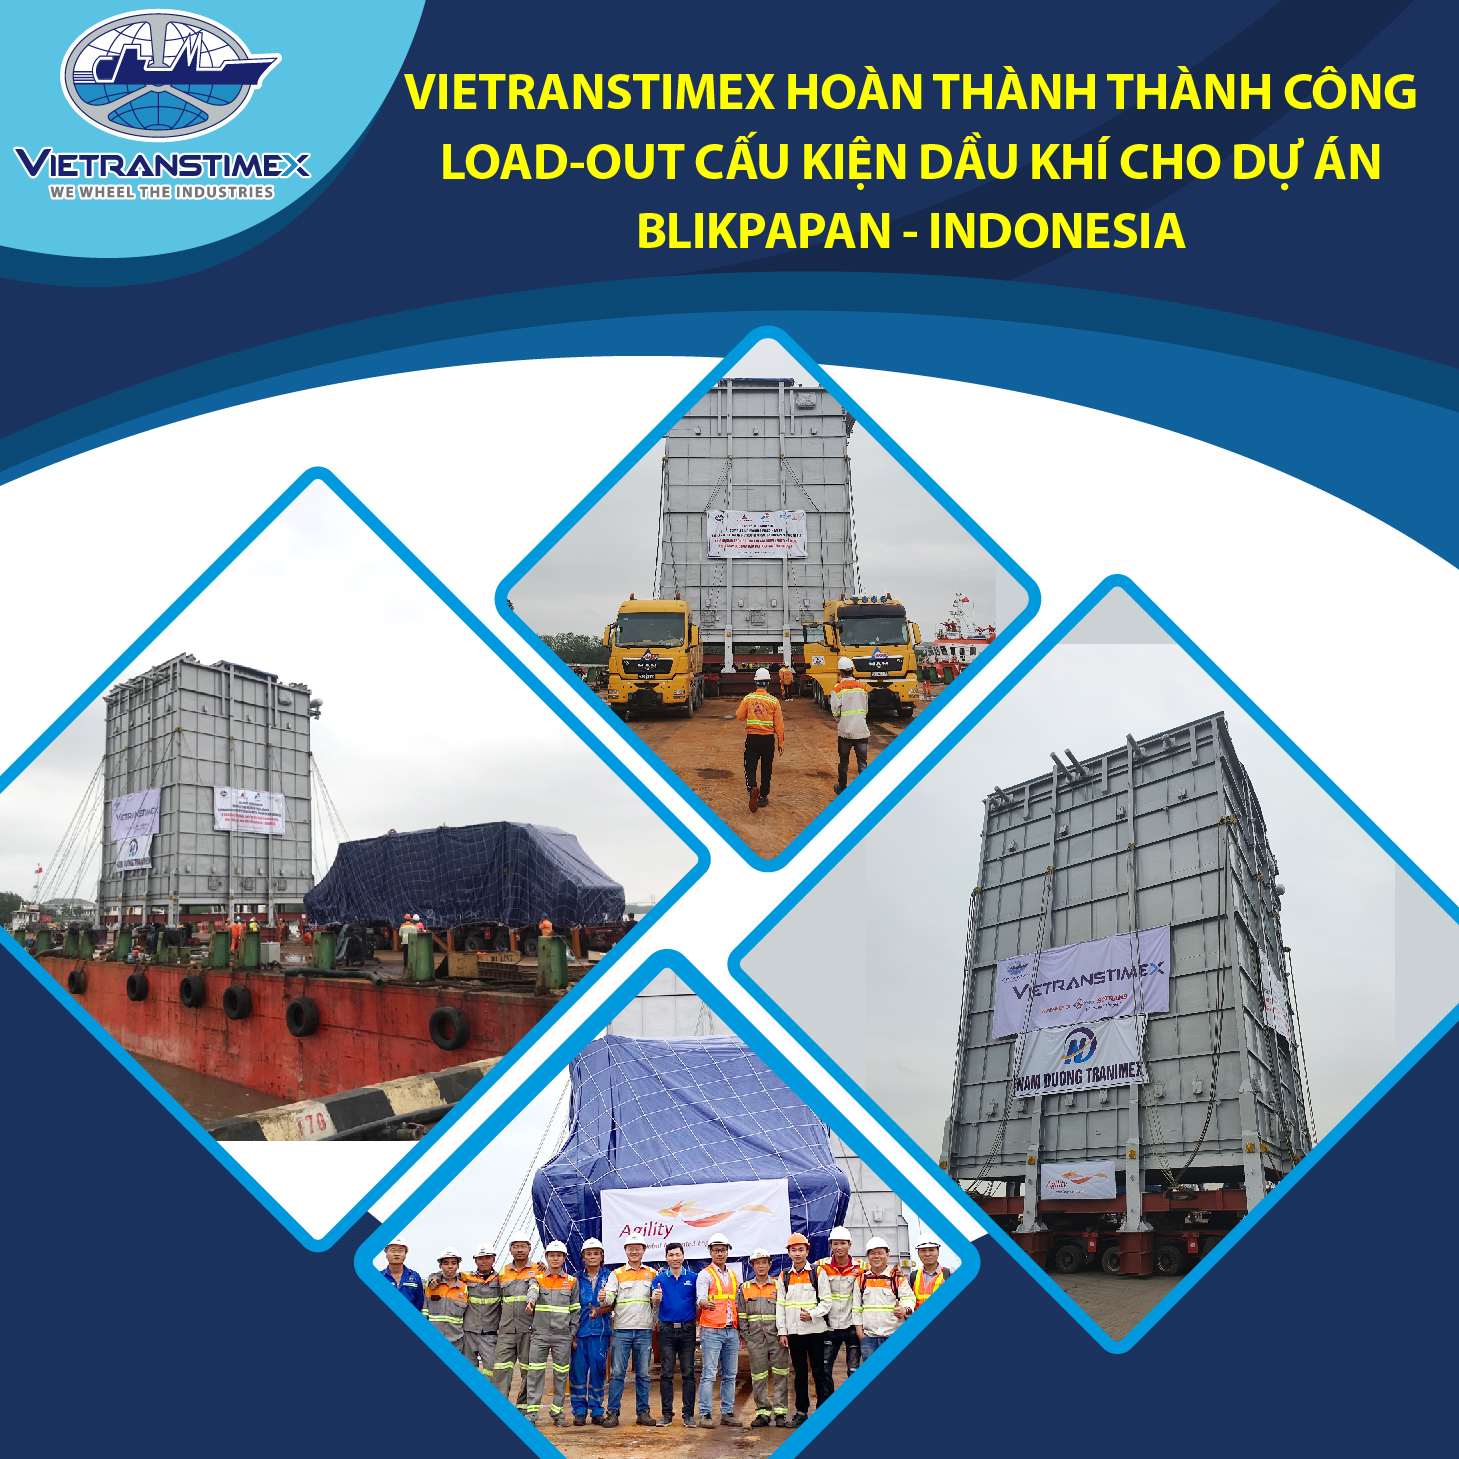 Vietranstimex Completed Successfully Load-Out Of Oil & Gas Structures  For Balikpapan - Indonesia Project